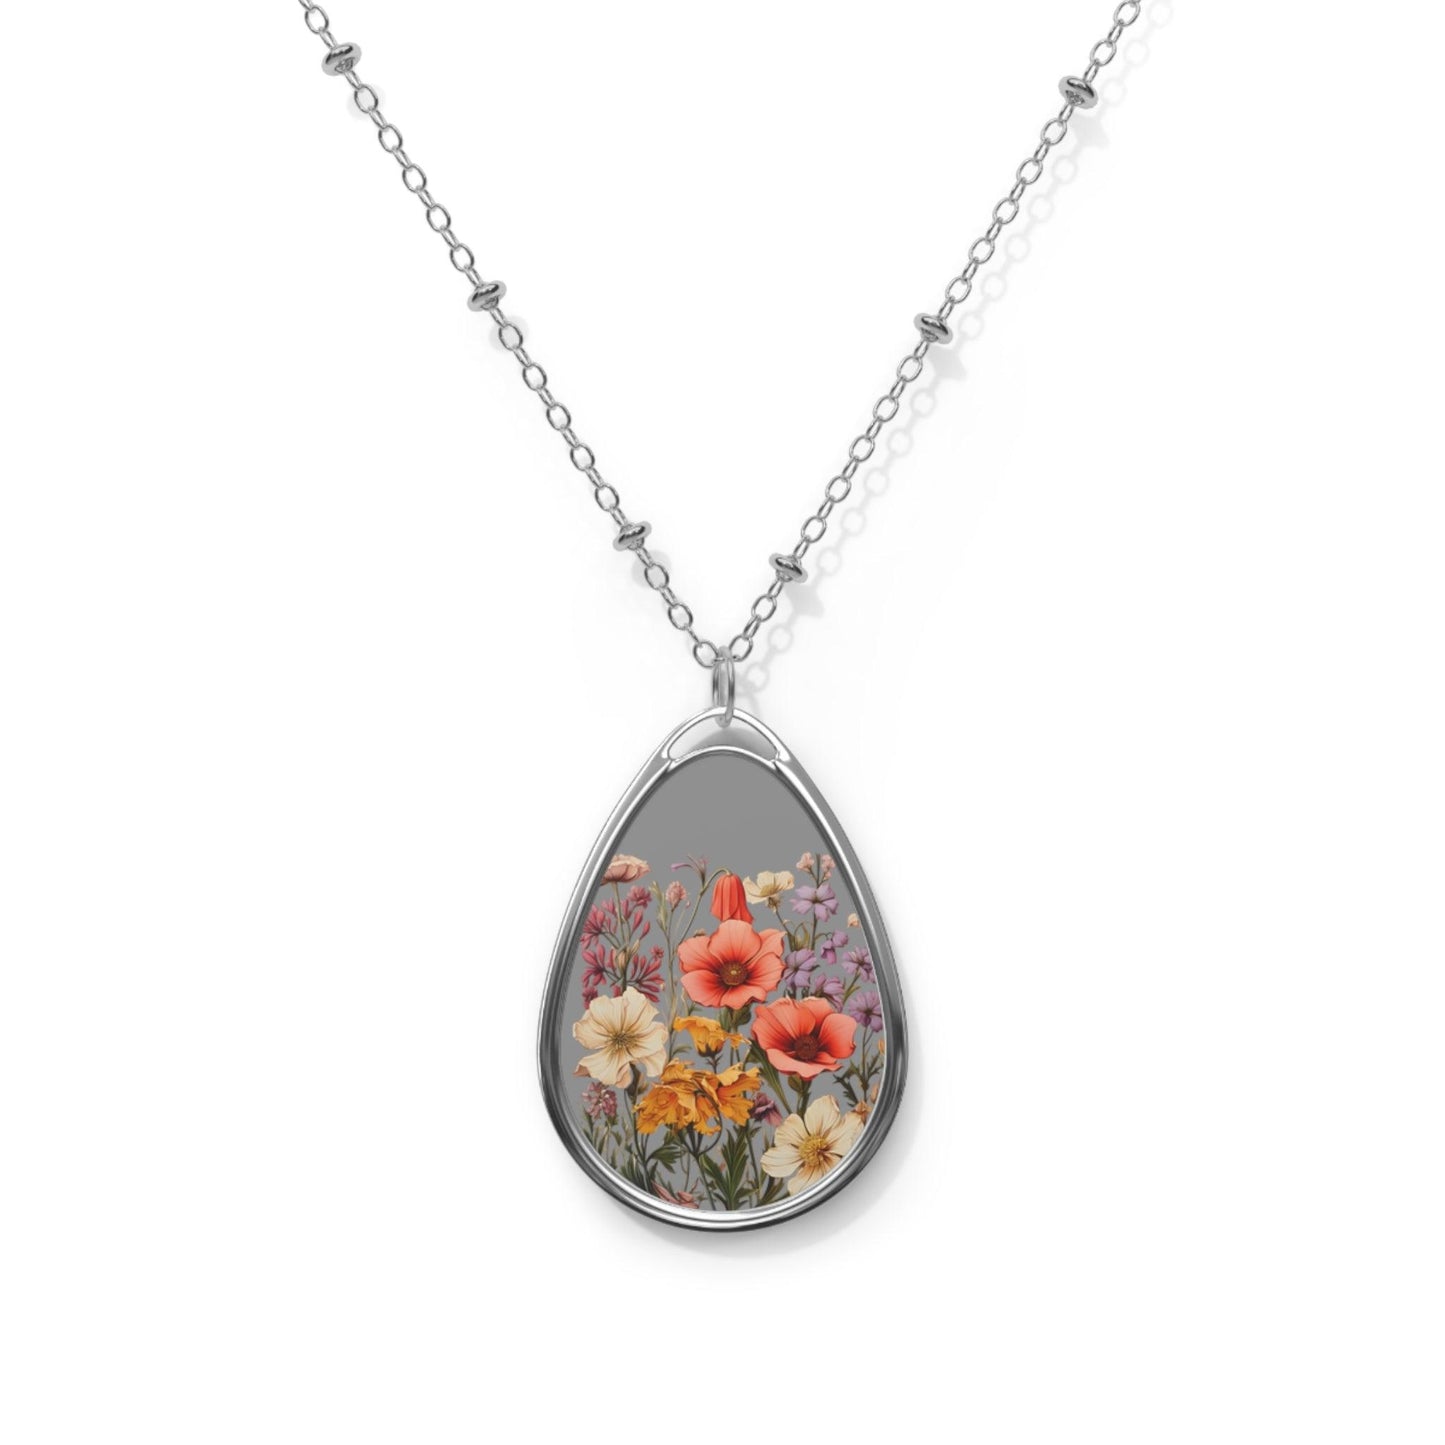 Flower Jewelry Nature Flower Oval Necklace Flower Necklace - Unique Gift For Her Birthday Christmas Flower Necklace Flower Jewelry Nature Jewelry Floral Jewelry - Giftsmojo